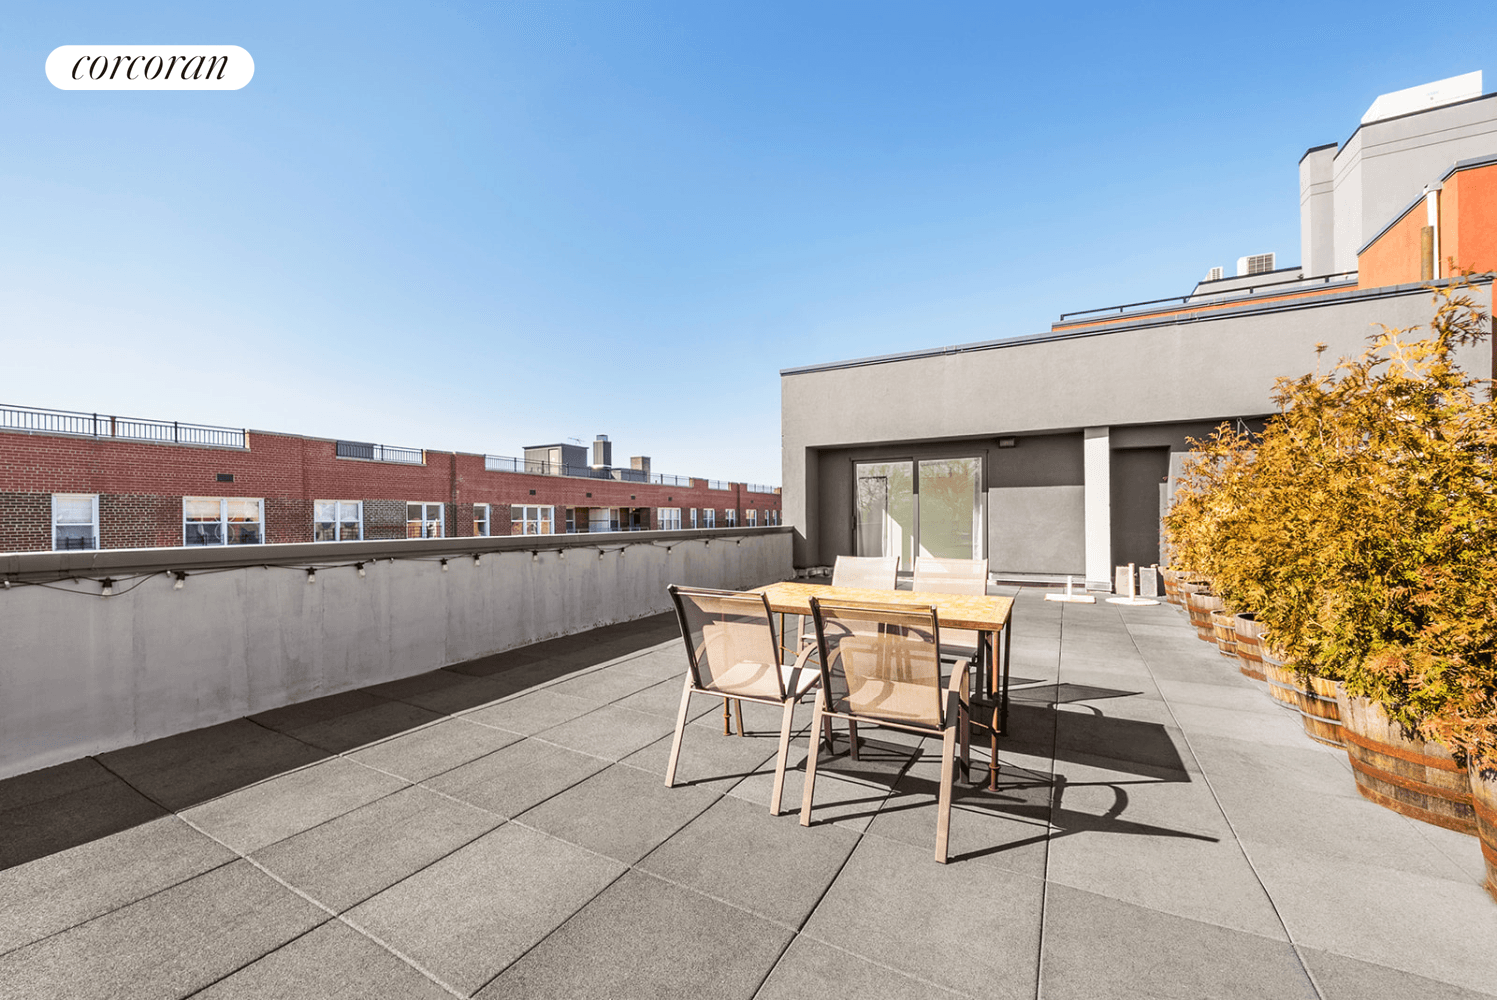 Your own private ROOF DECK !